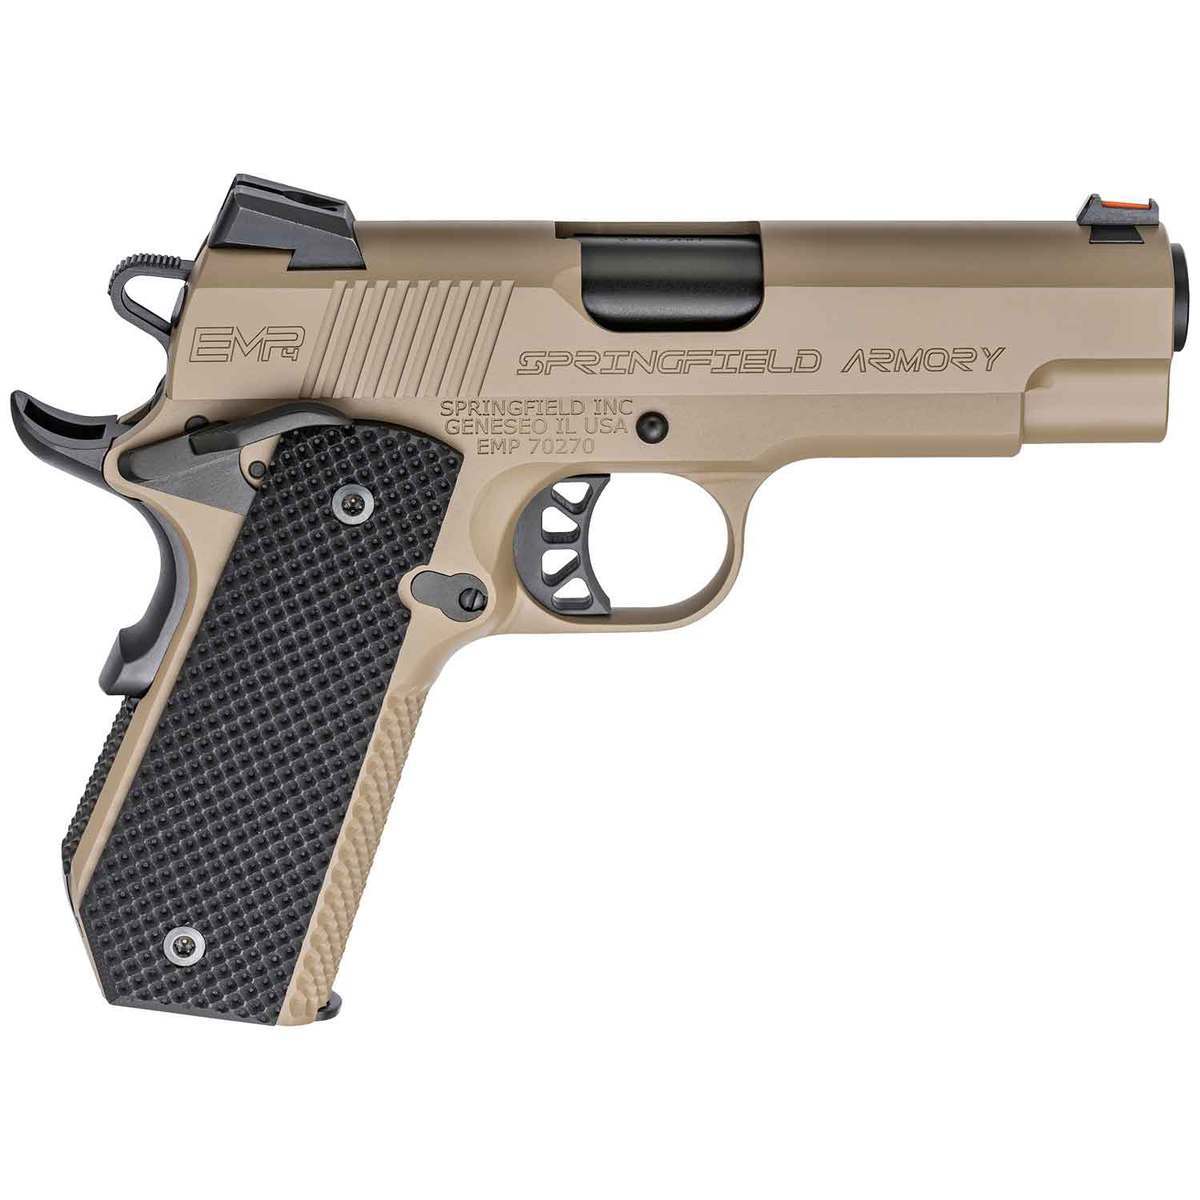 Springfield Armory 1911 Emp Conceal Carry 9mm Luger 4in Desert Fde Pistol 91 Rounds